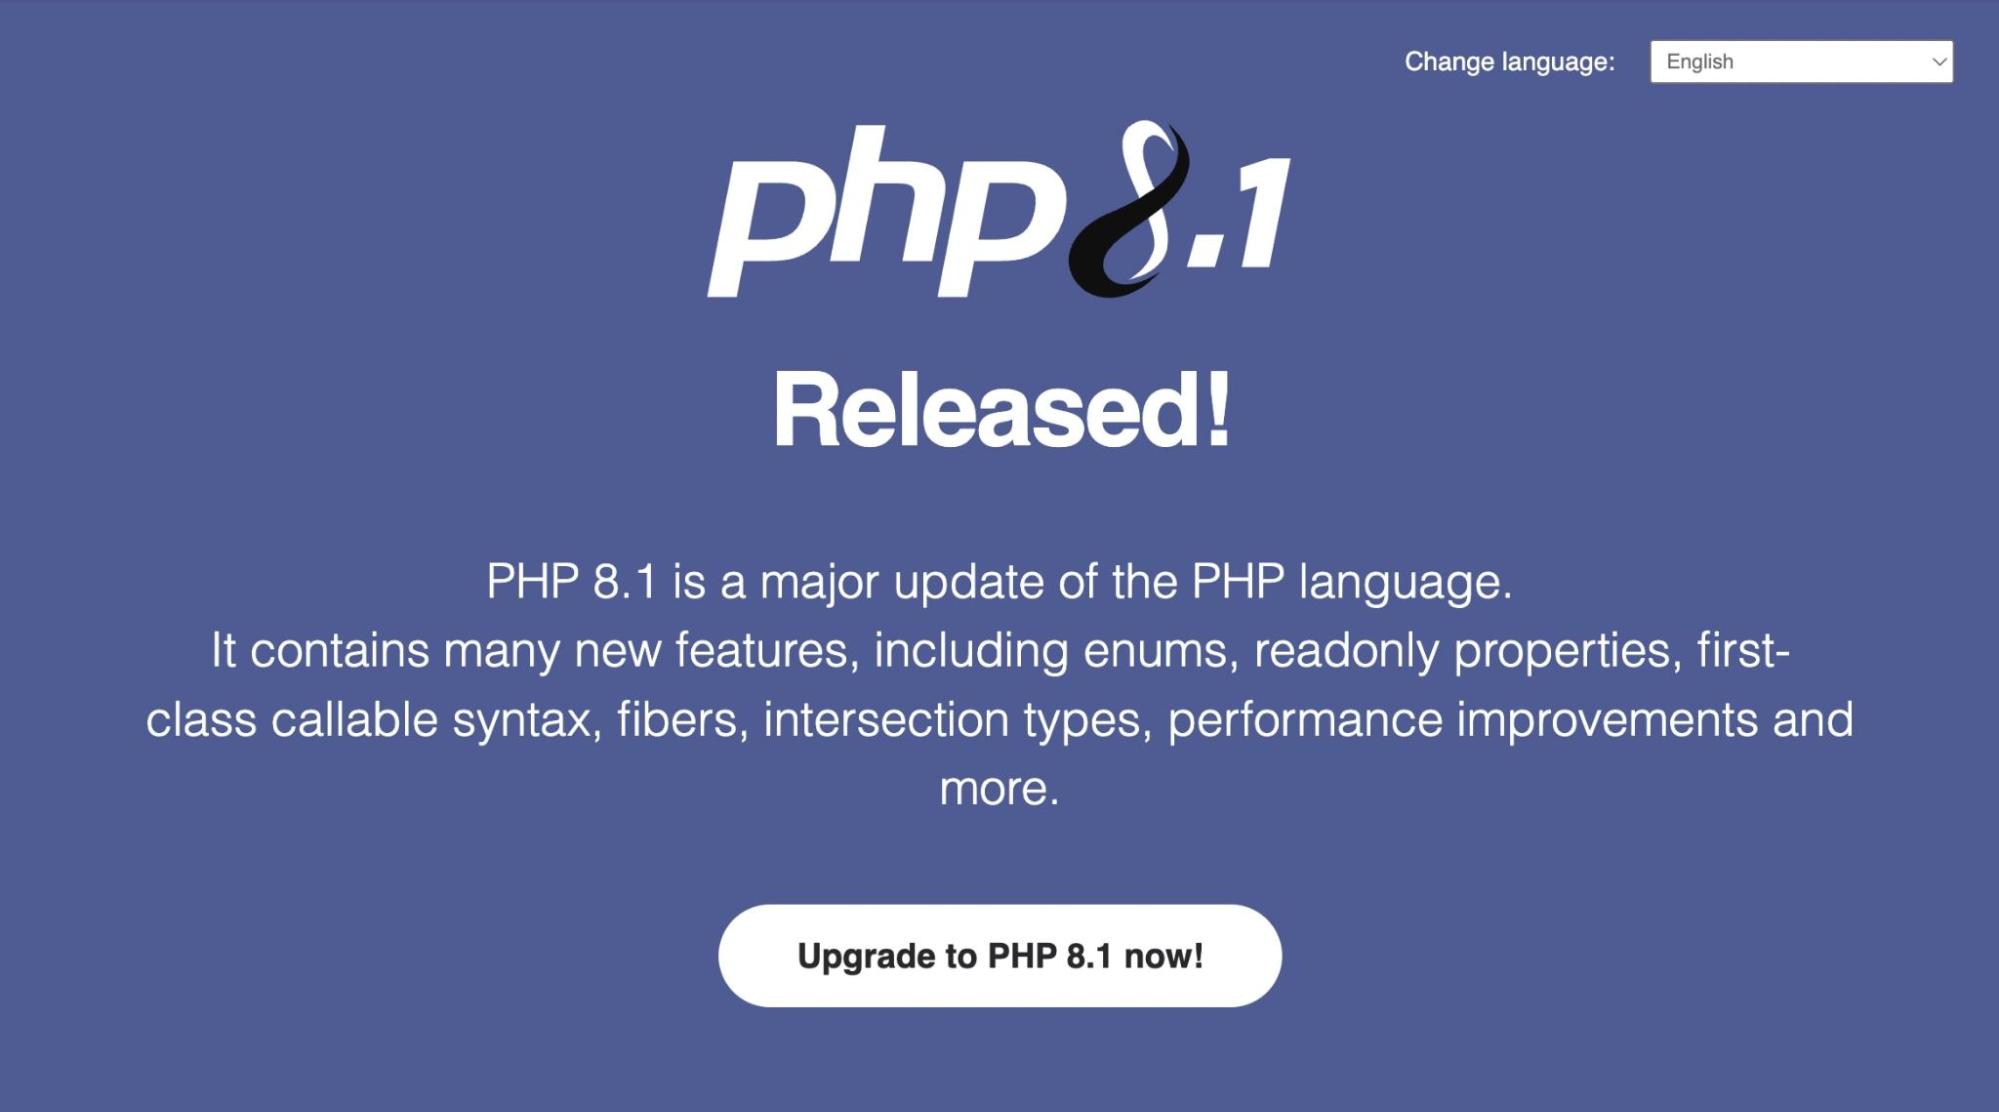 PHP 8.1 released